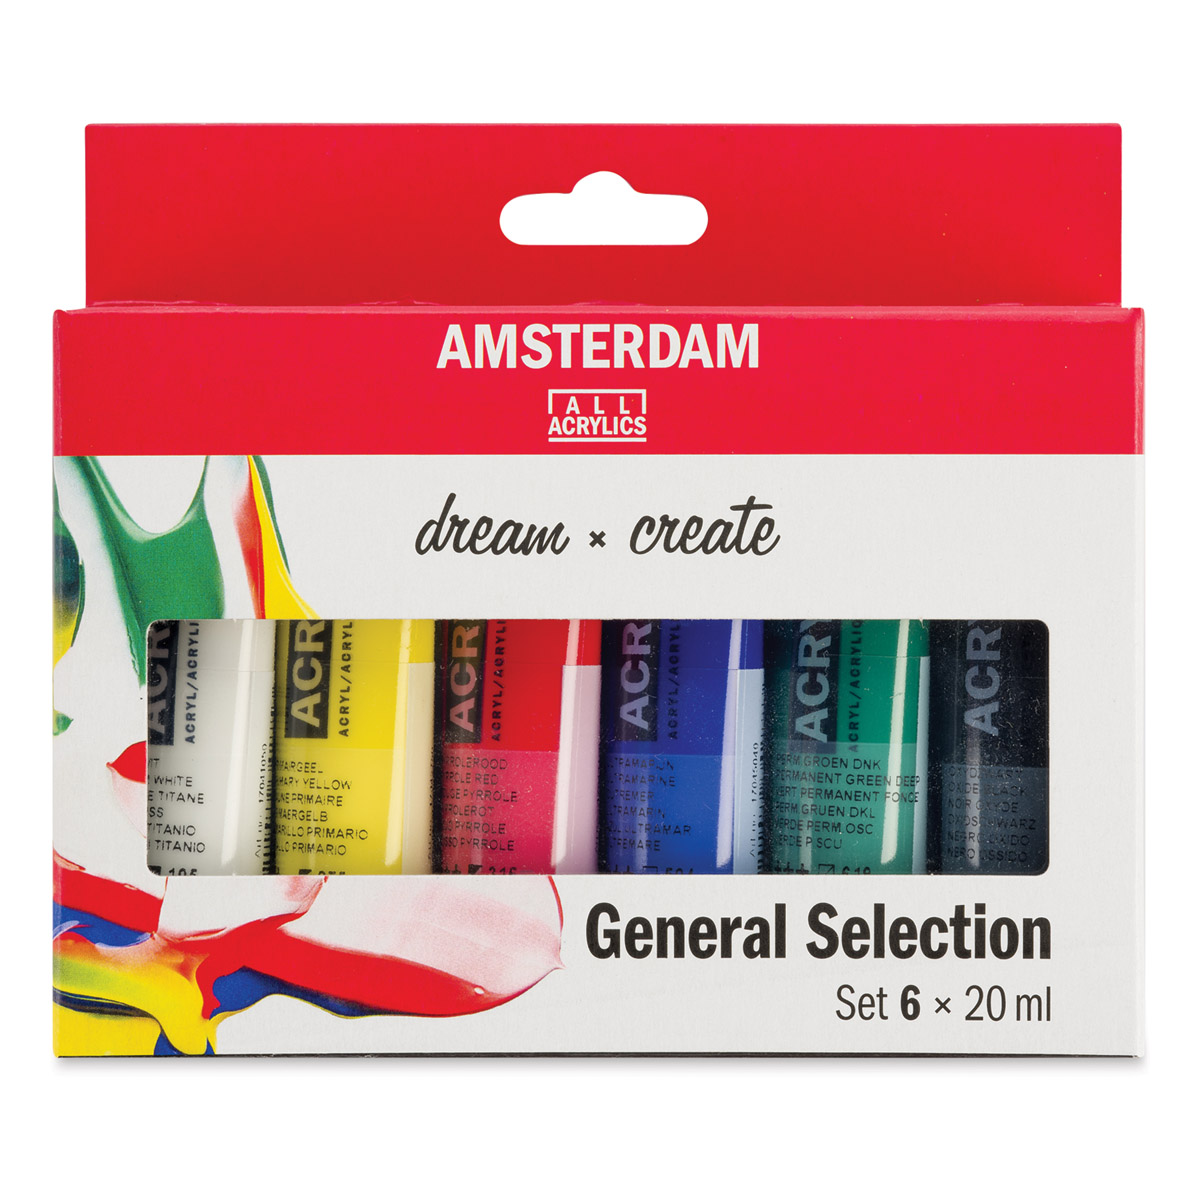 Amsterdam Acrylic Paints • Art Supply Guide